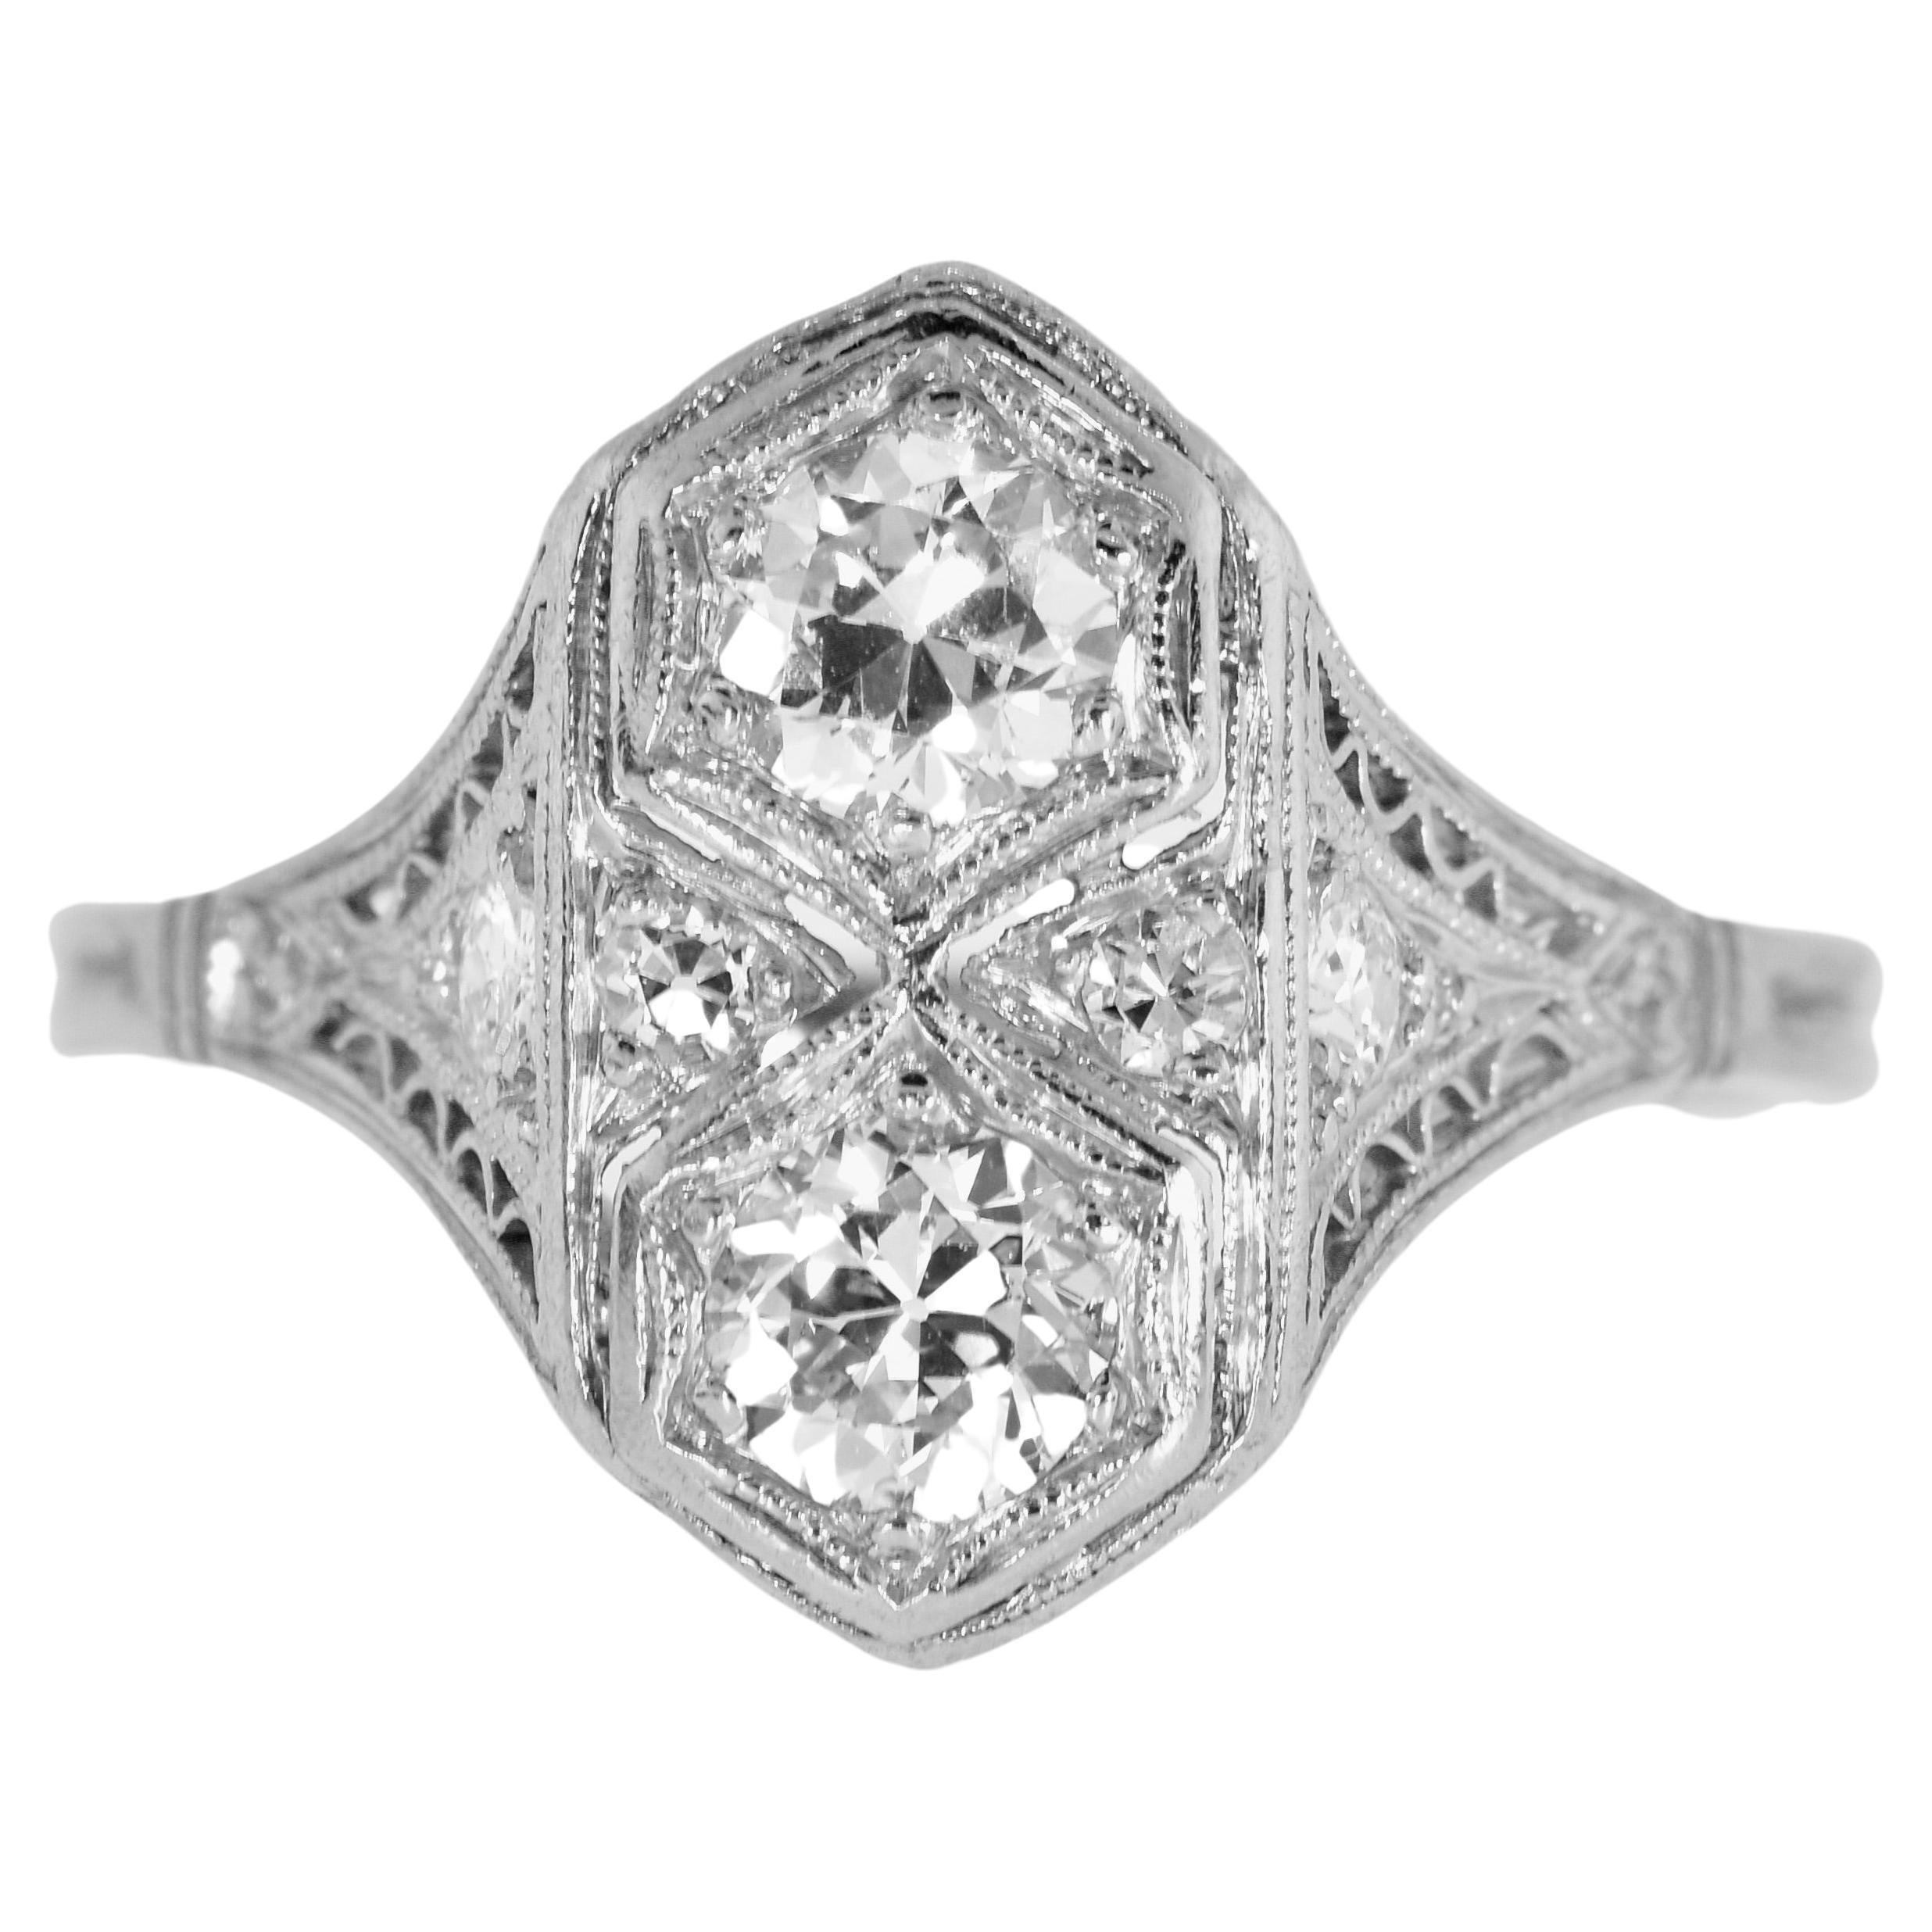 Antique Edwardian platinum and diamond ring, circa 1915.  In fine condition this filigree platinum ring centers two European cut diamonds.  The well matched stones are near colorless (H), and VS, very slightly included.  Accenting and set on either